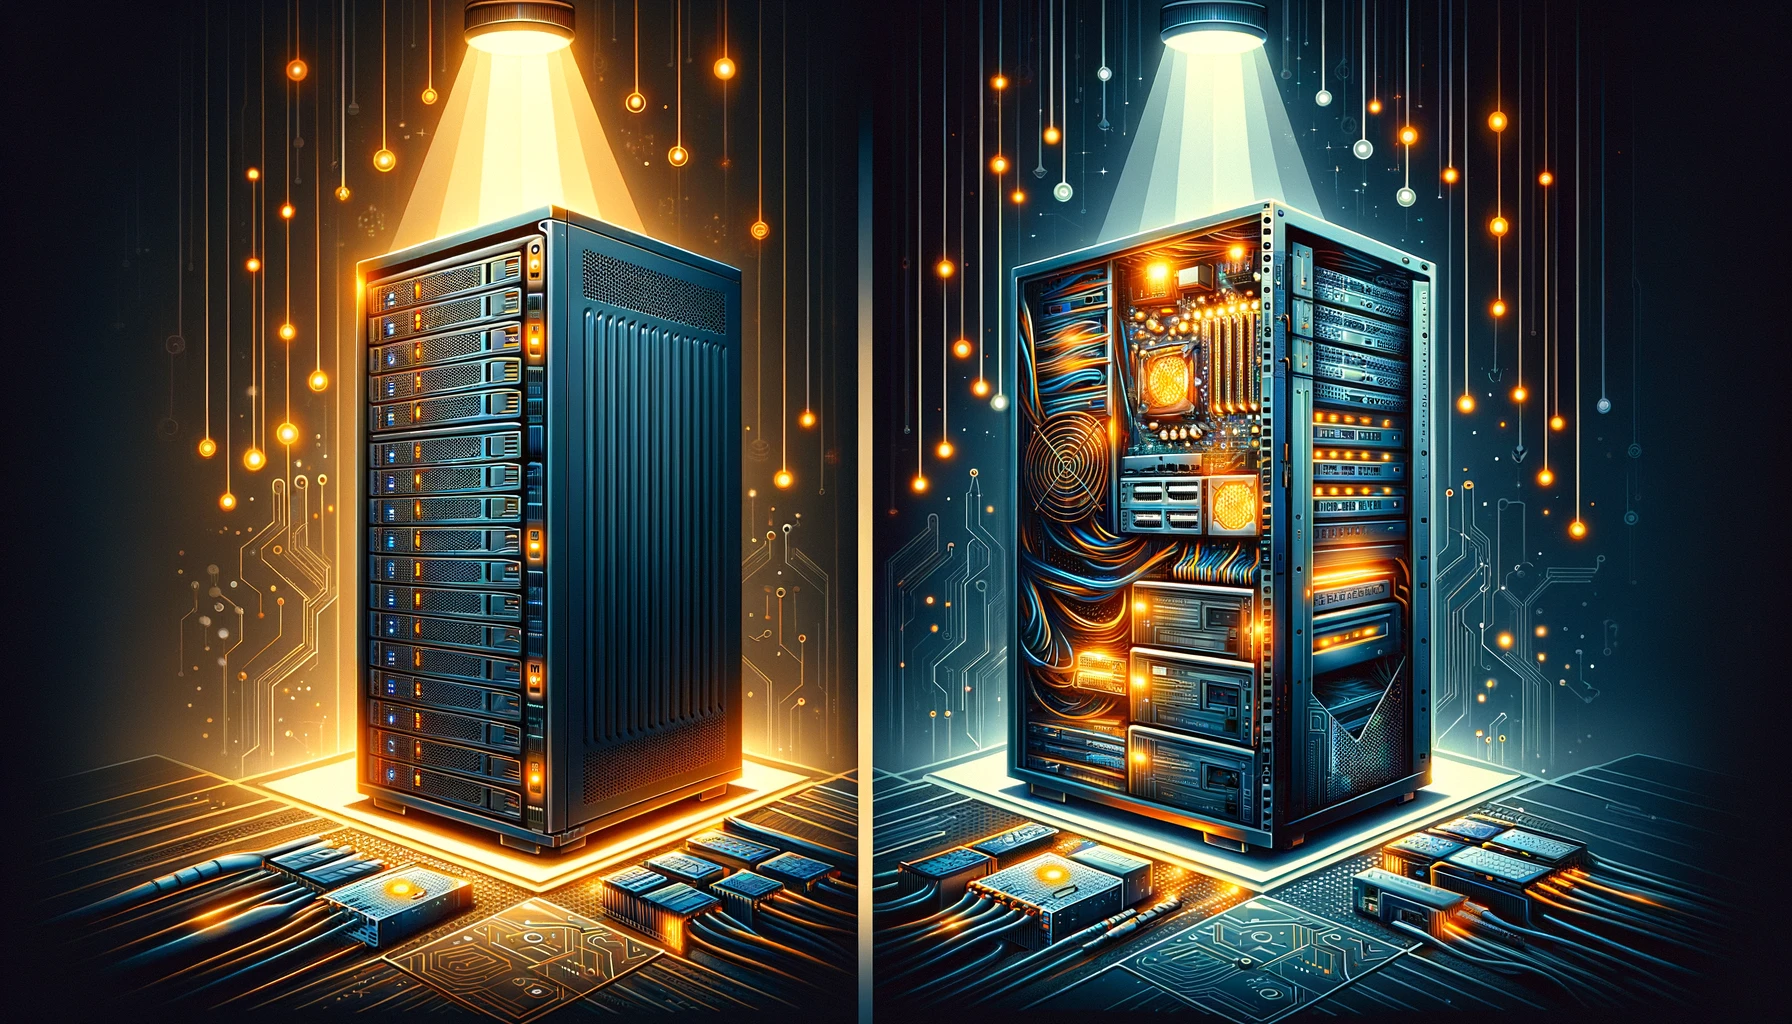 Dedicated Servers vs. Bare Metal Servers: Which Hosting Option is Right for You?